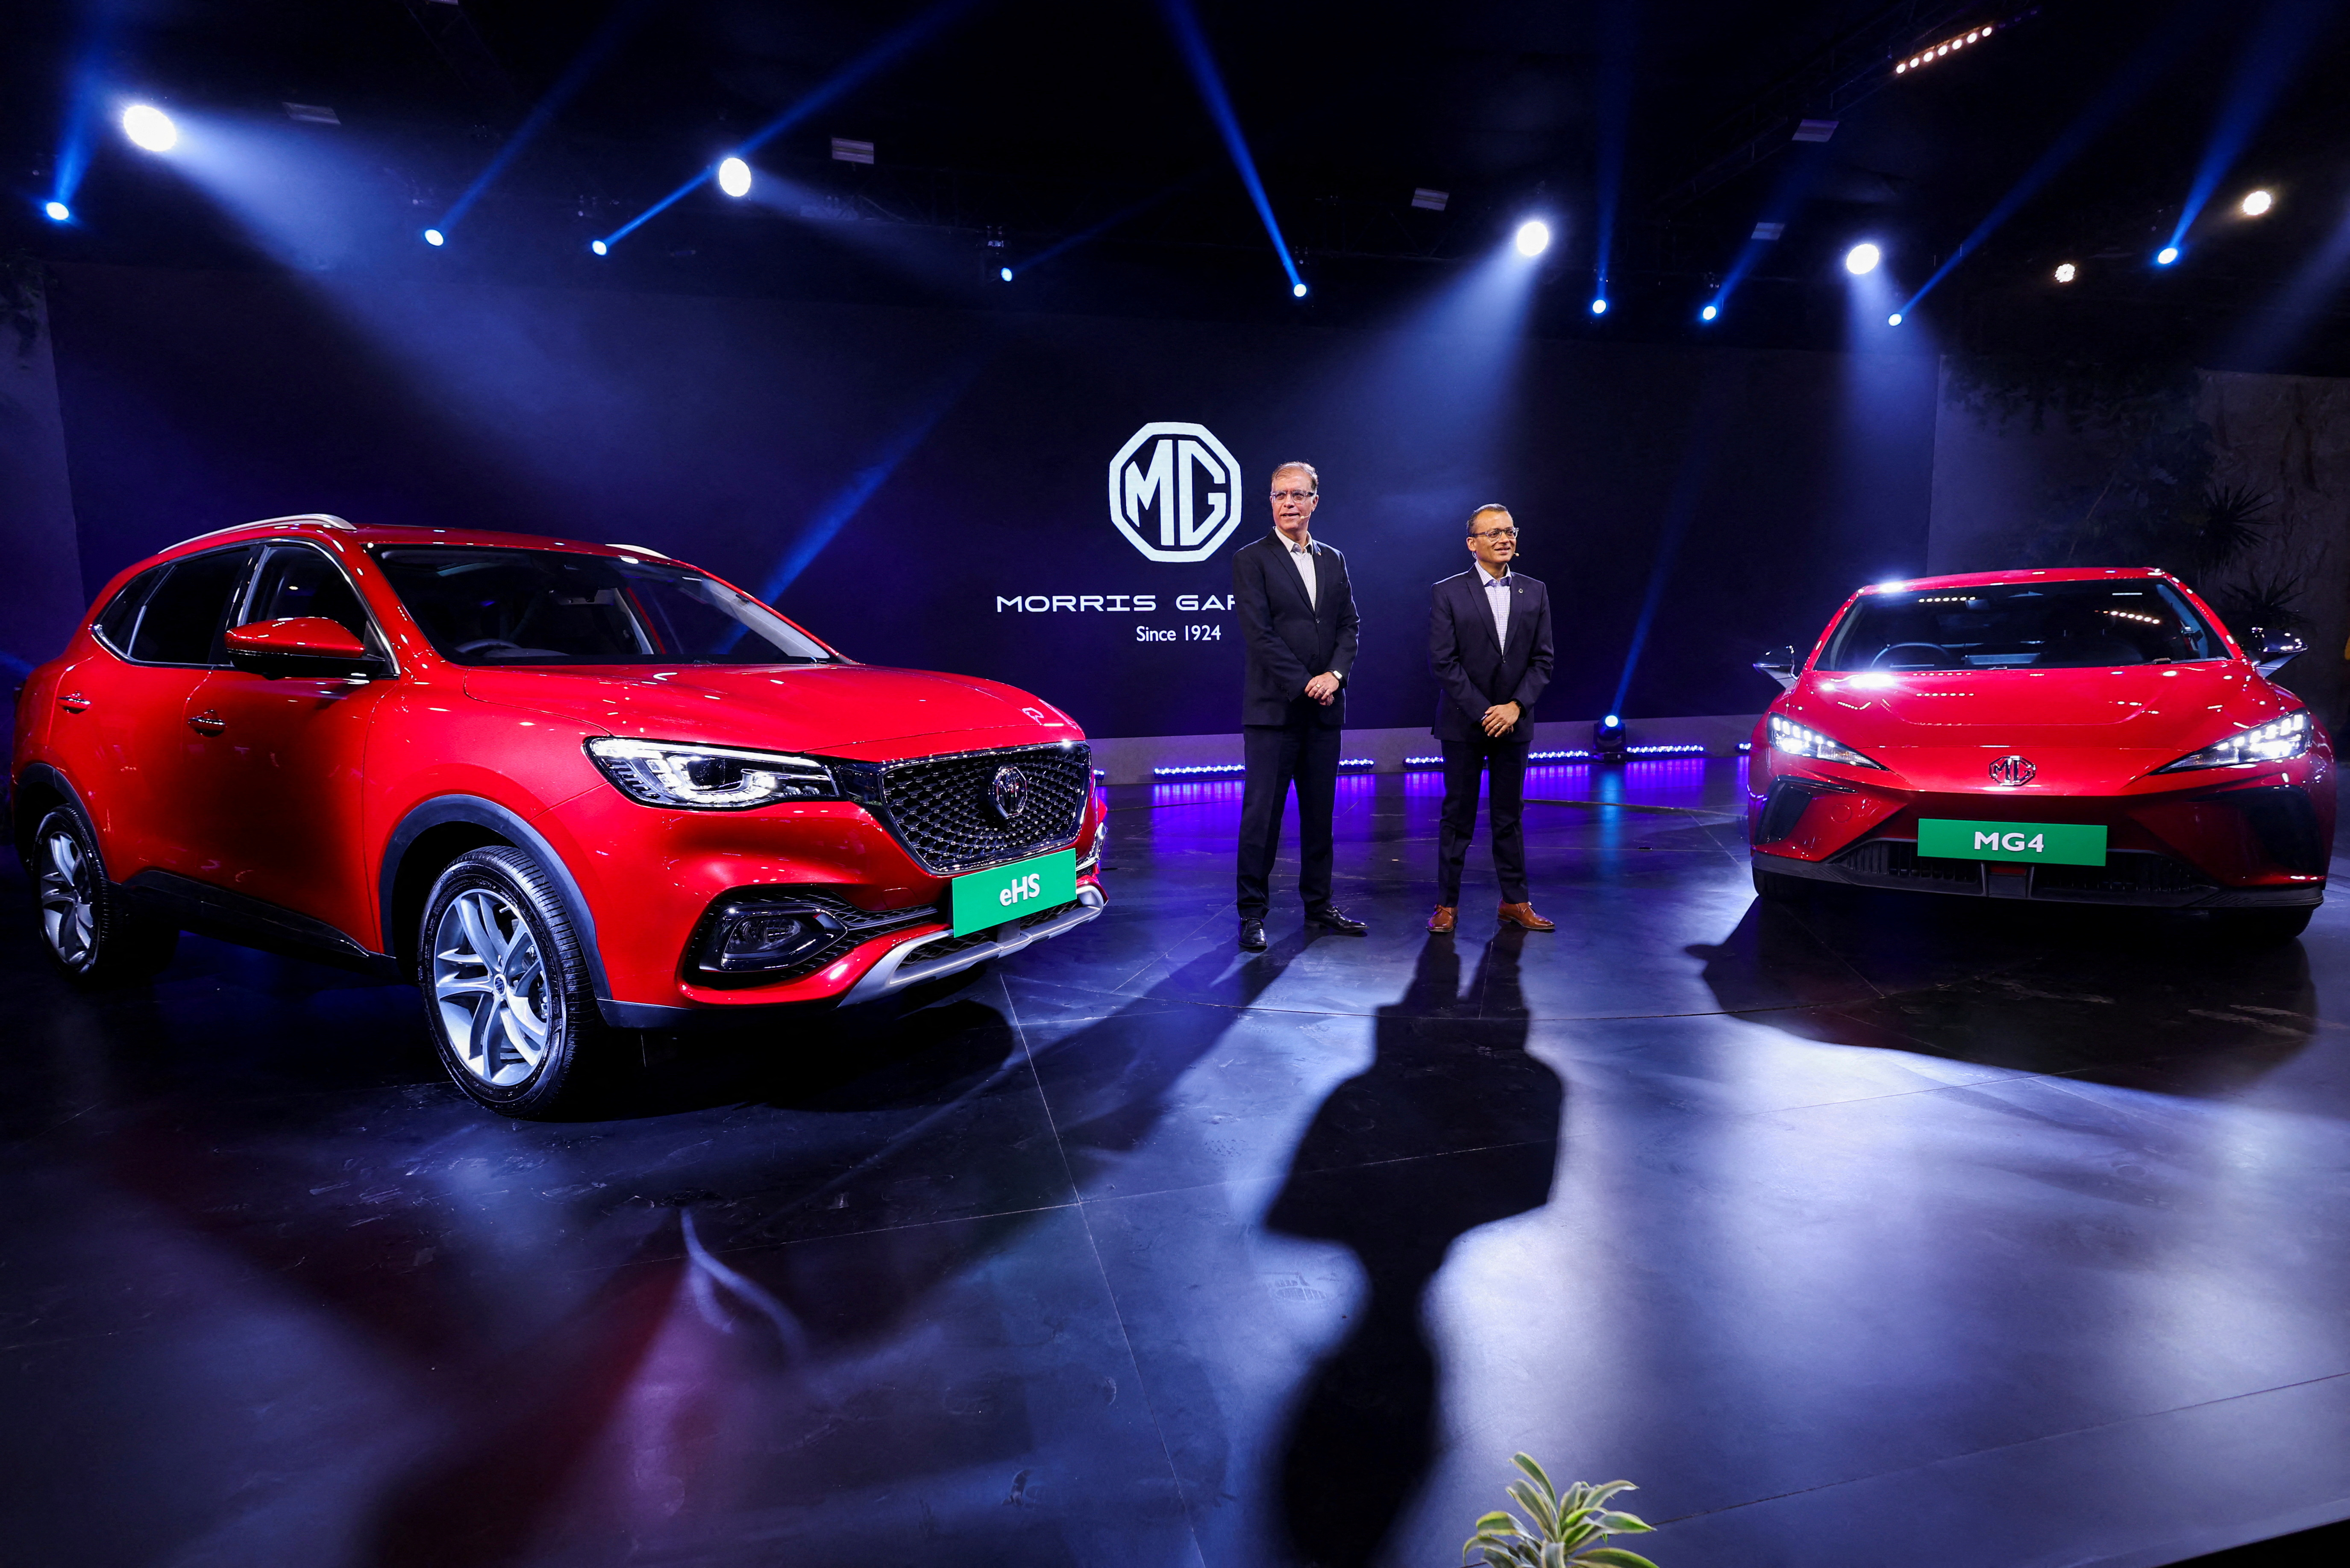 MG Motor India has made a significant investment of Rs 800Cr to manufacture the Comet EV at its plant in Halol, Gujarat.